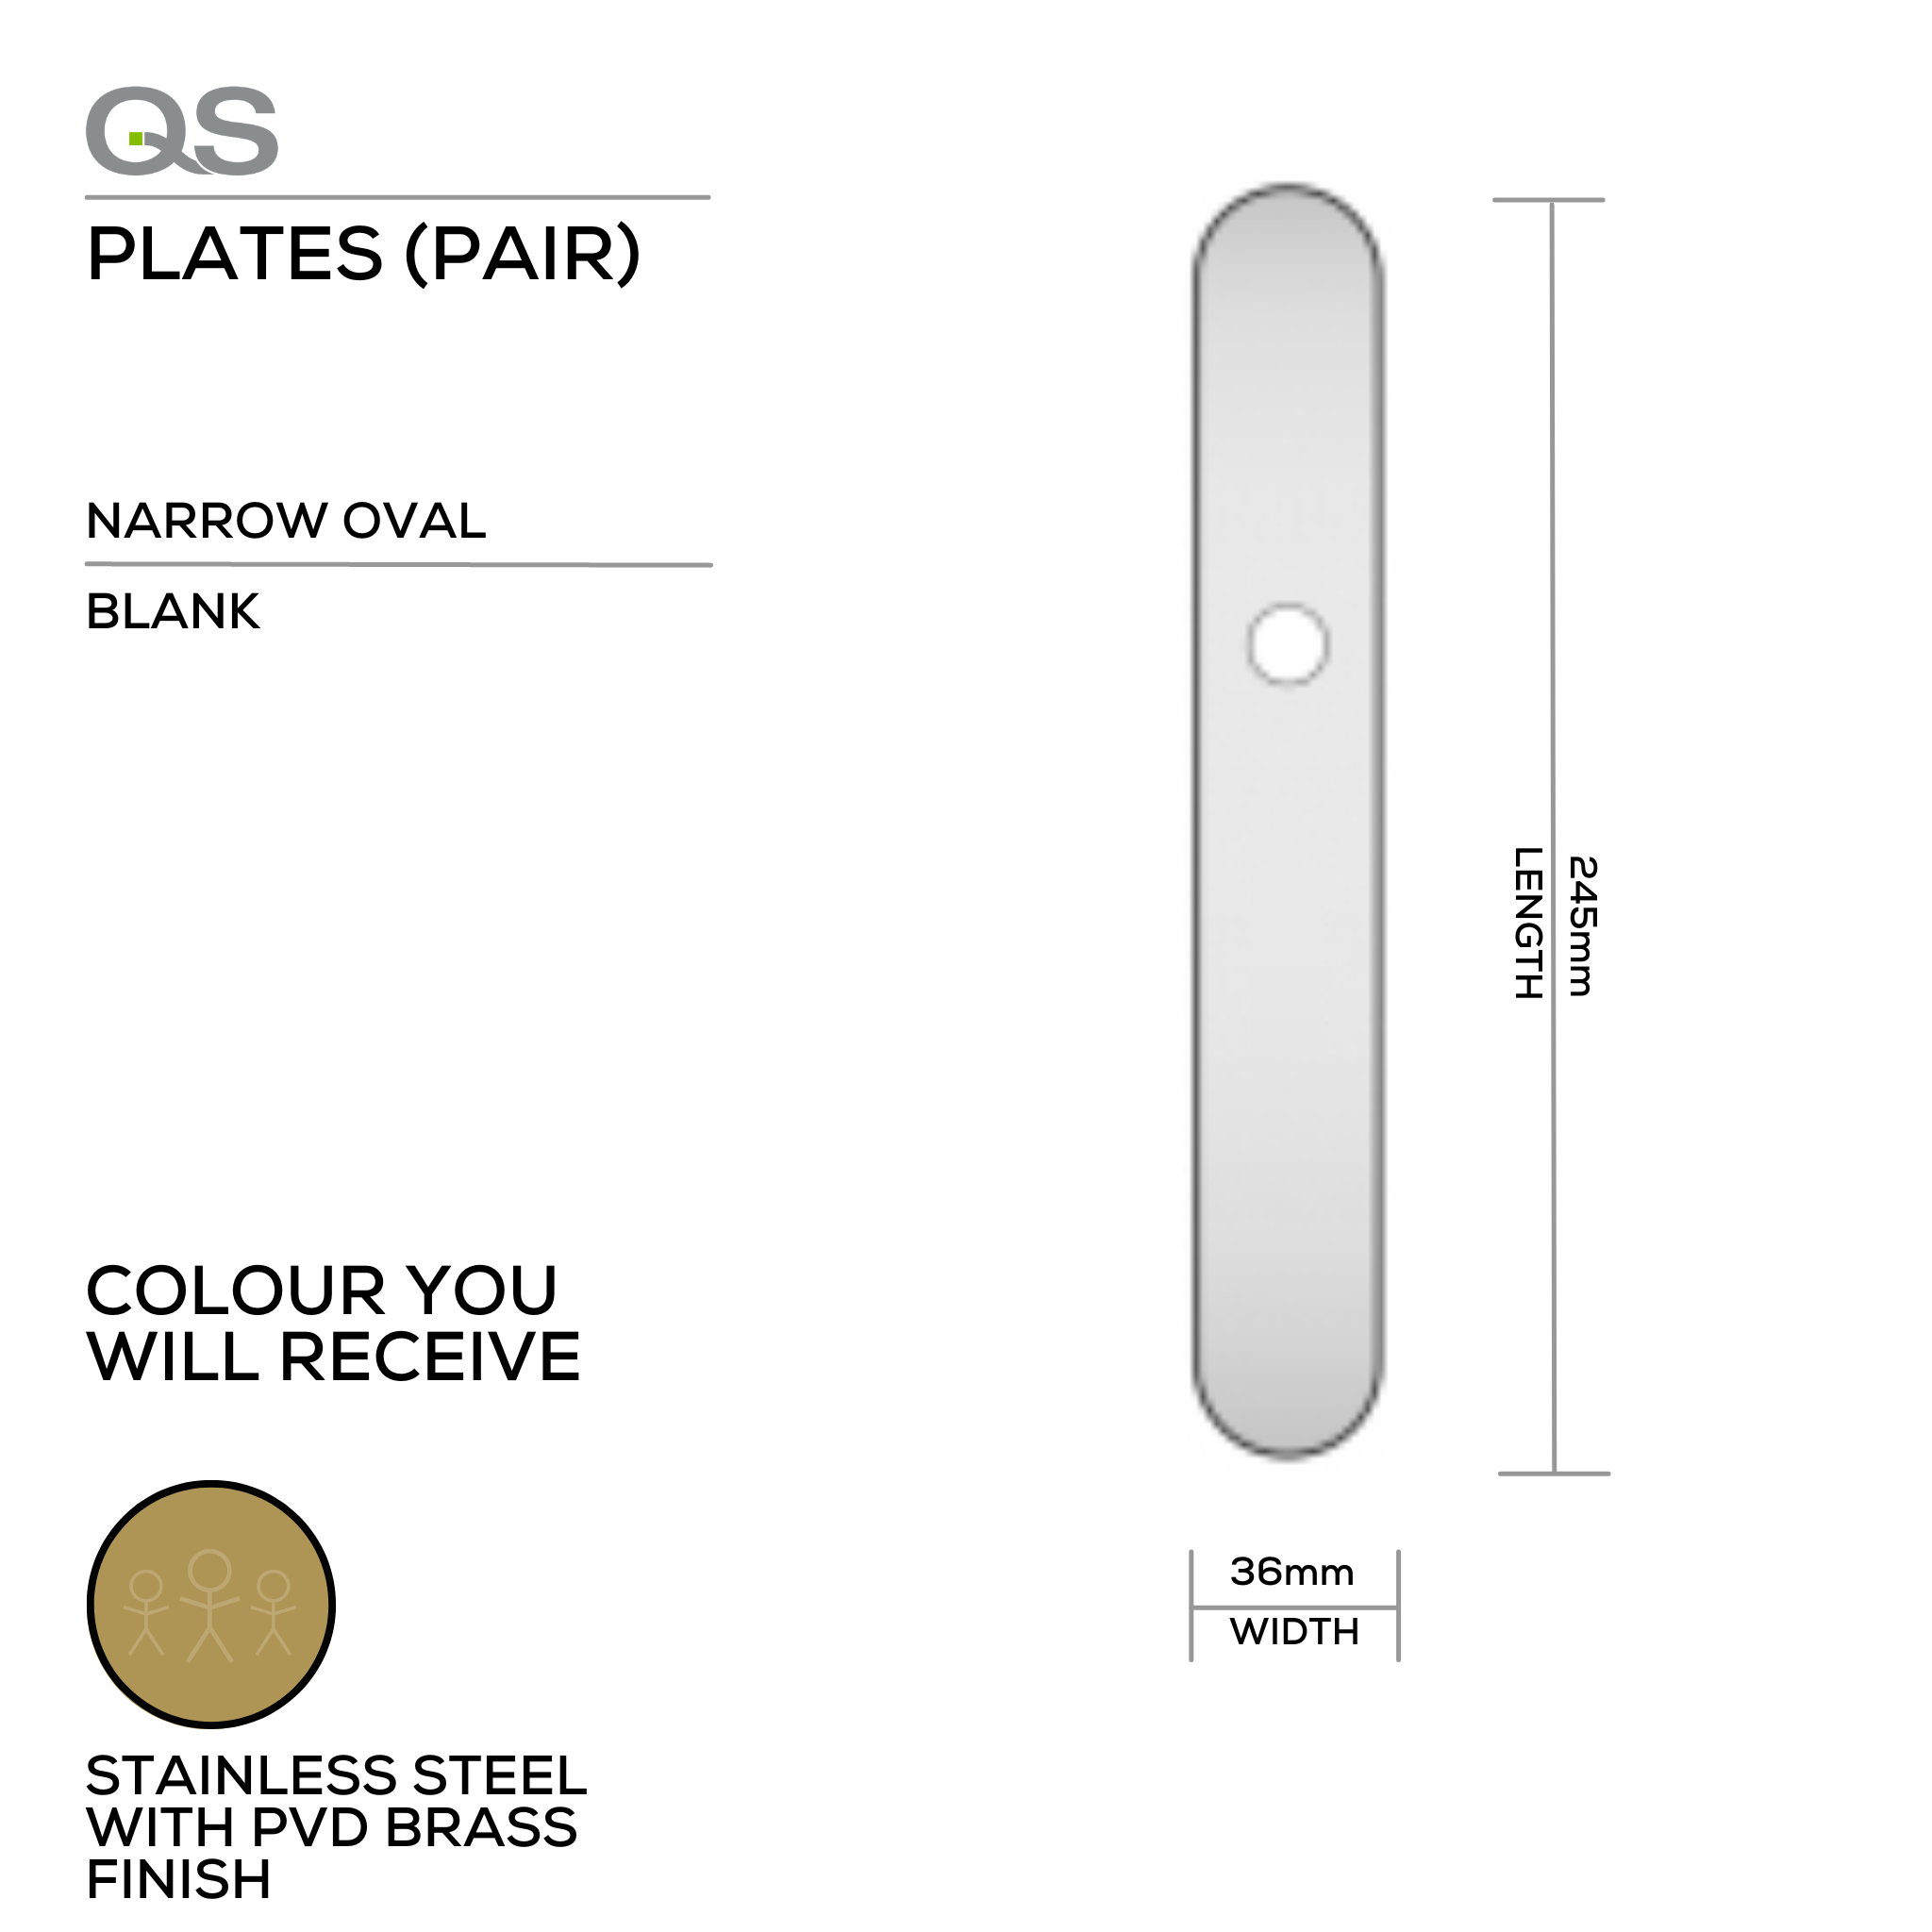 QS4483 PVD BLANK, Plate, Narrow Oval, 245mm (l) x 36mm (w), Supplied without QS Handle, PVD Brass, QS